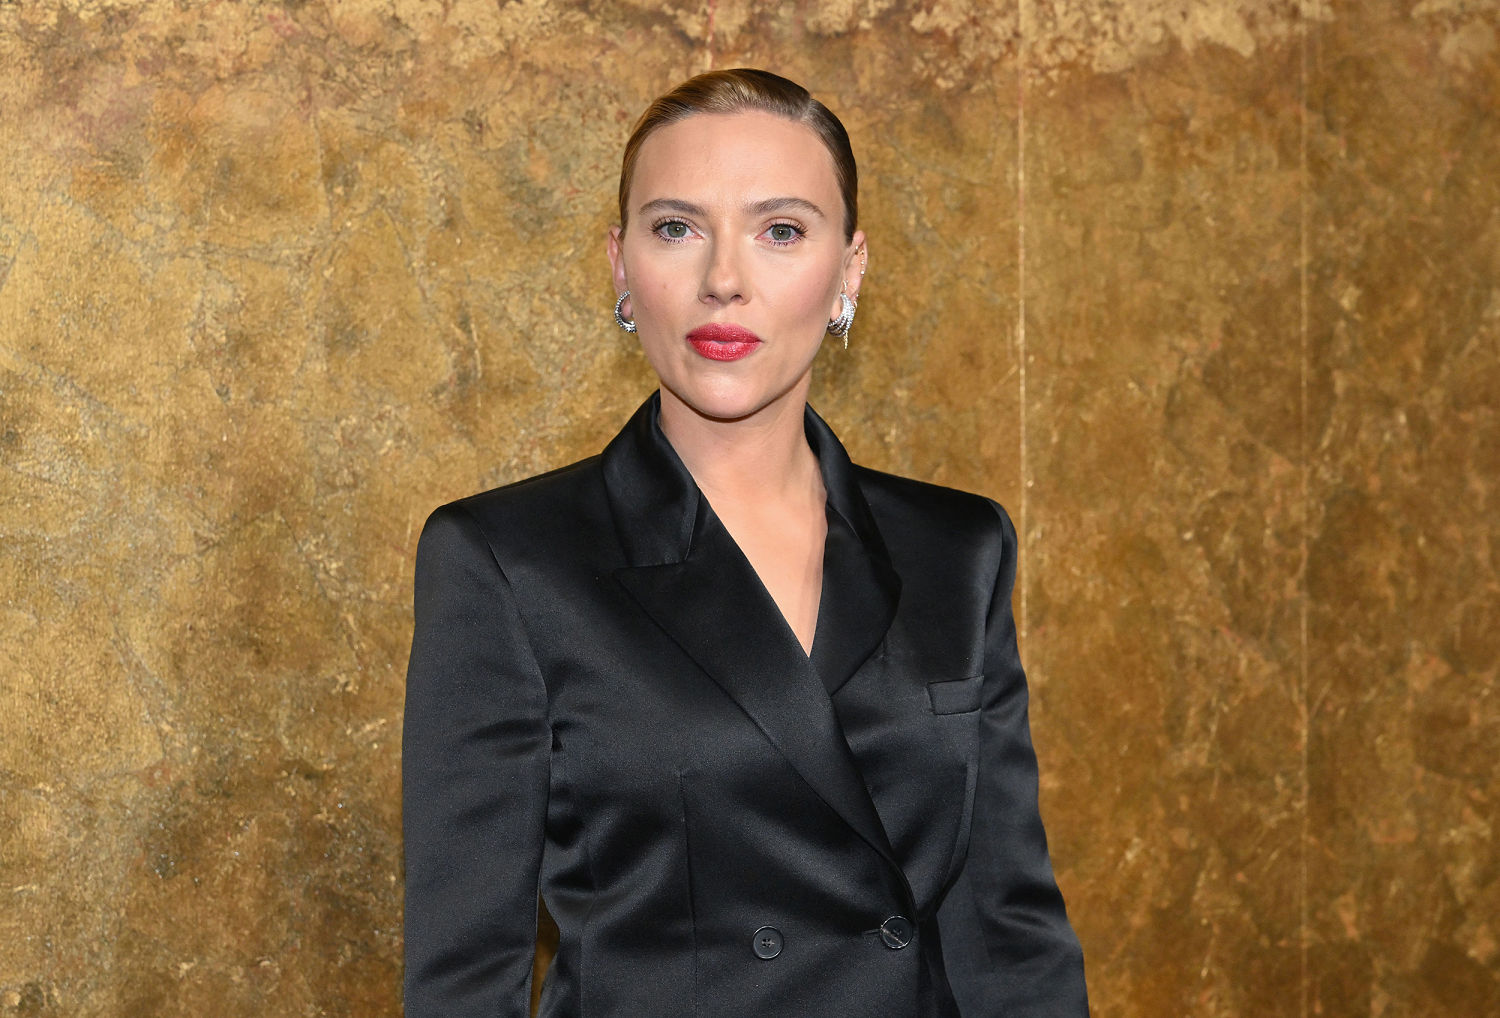 Scarlett Johansson says she was 'shocked, angered' when she heard OpenAI voice that sounded like her